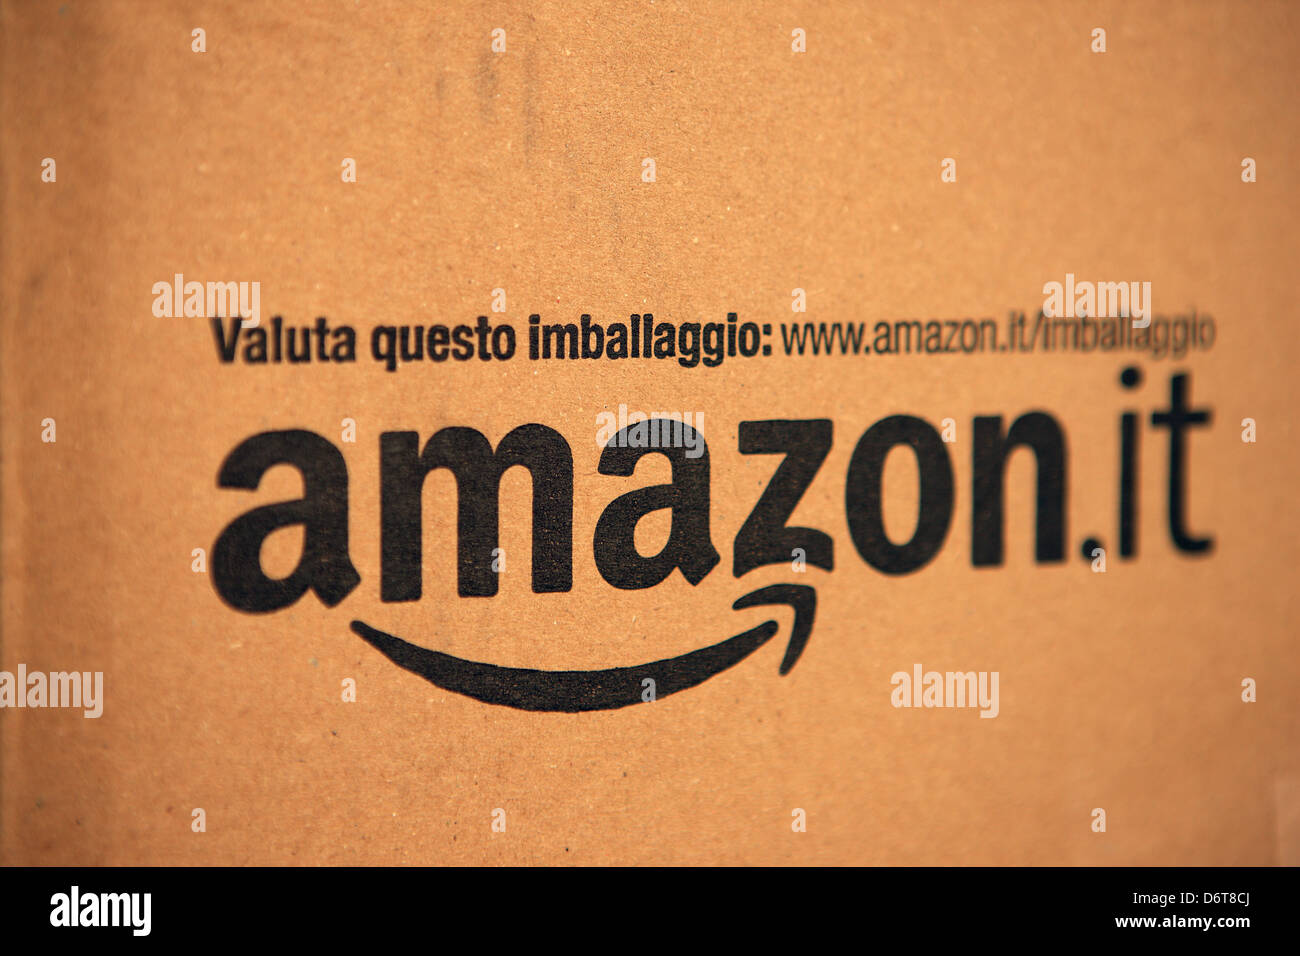 Amazon.it logo on the side of an amazon delivery box Stock Photo